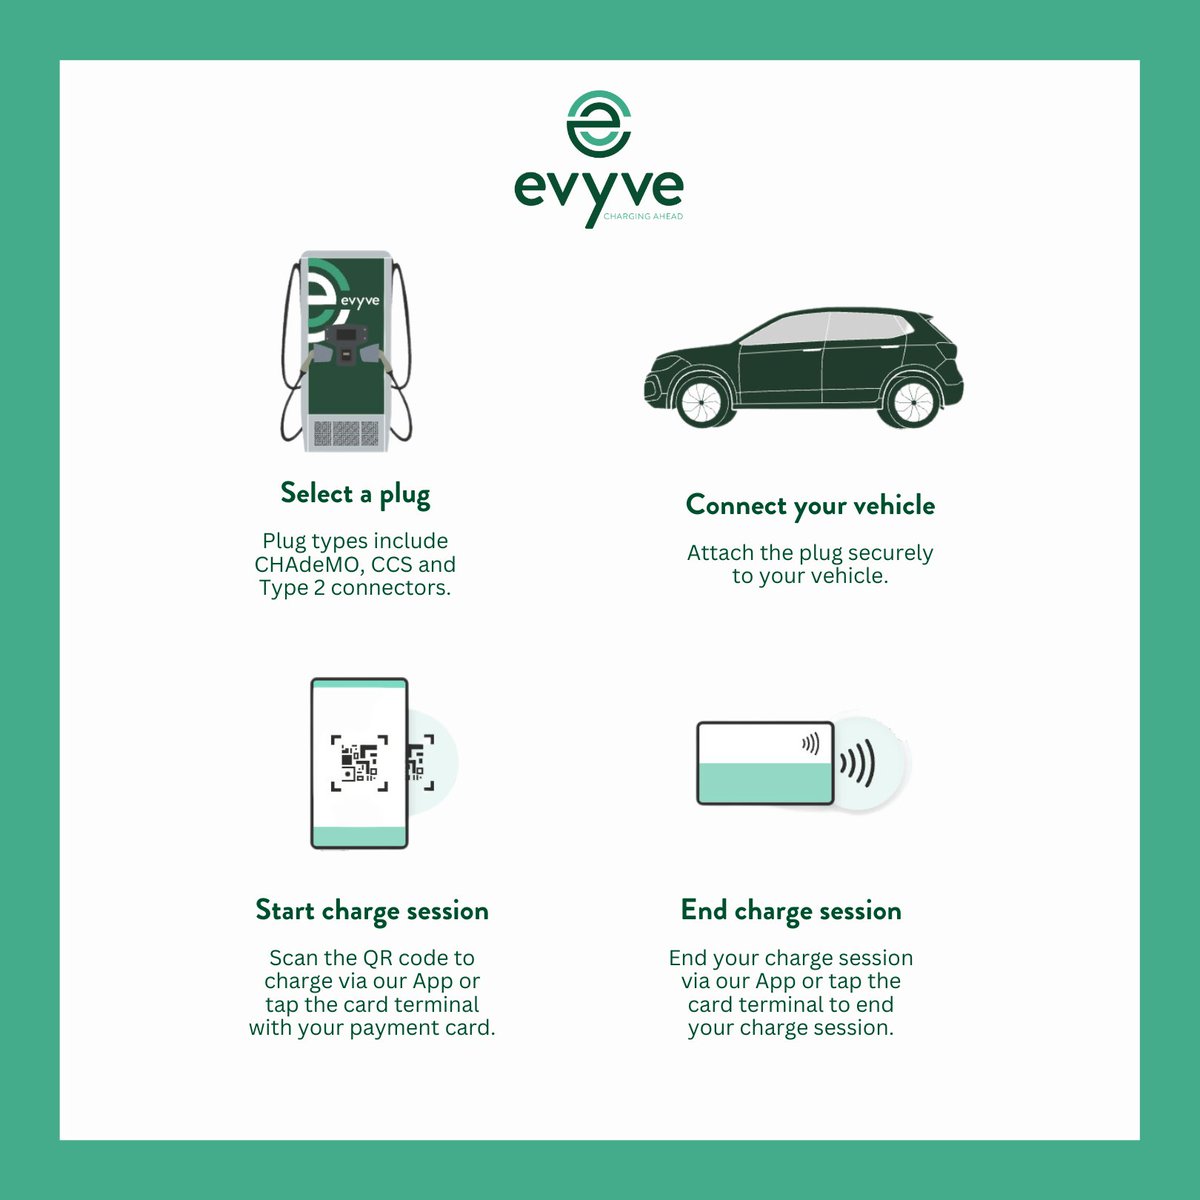 Easy as 1-2-3: Choose a plug, connect your vehicle, start your charge session, and when you're done, simply end the session 🚗⚡

Find your nearest charge: evyve.co.uk

#Evyve #EVNetwork #EV #SustainableCharging #EVCharging #ElectricVehicle #EVChargers #Sustainability